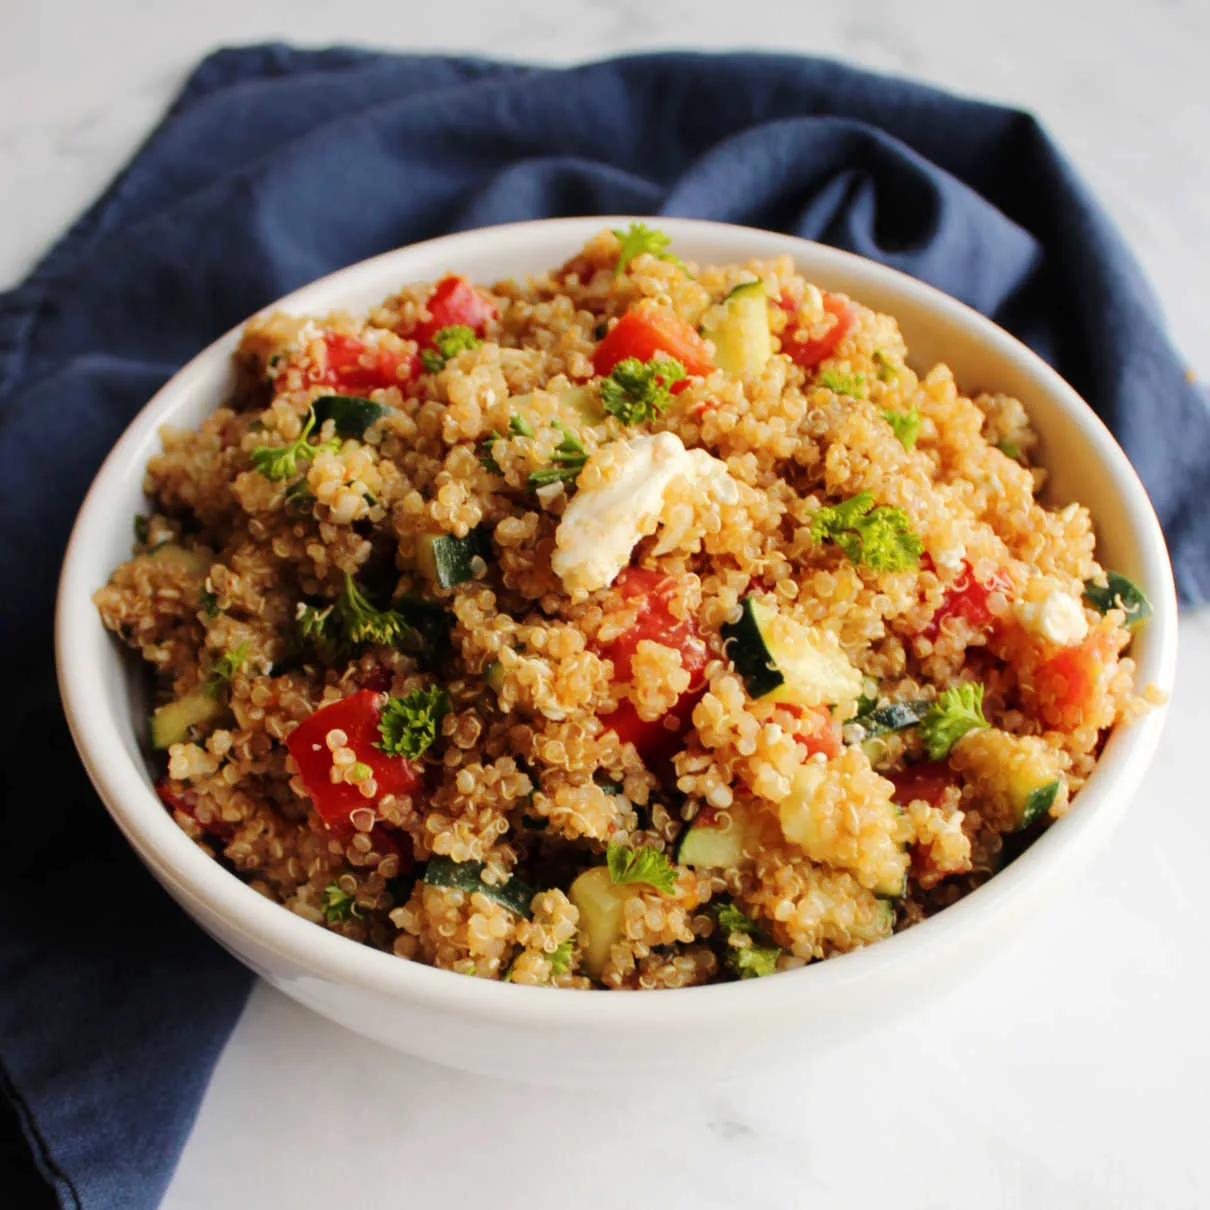 bowl of Mediterranean quinoa salad with tomatoes, cucumbers, feta and parsley.